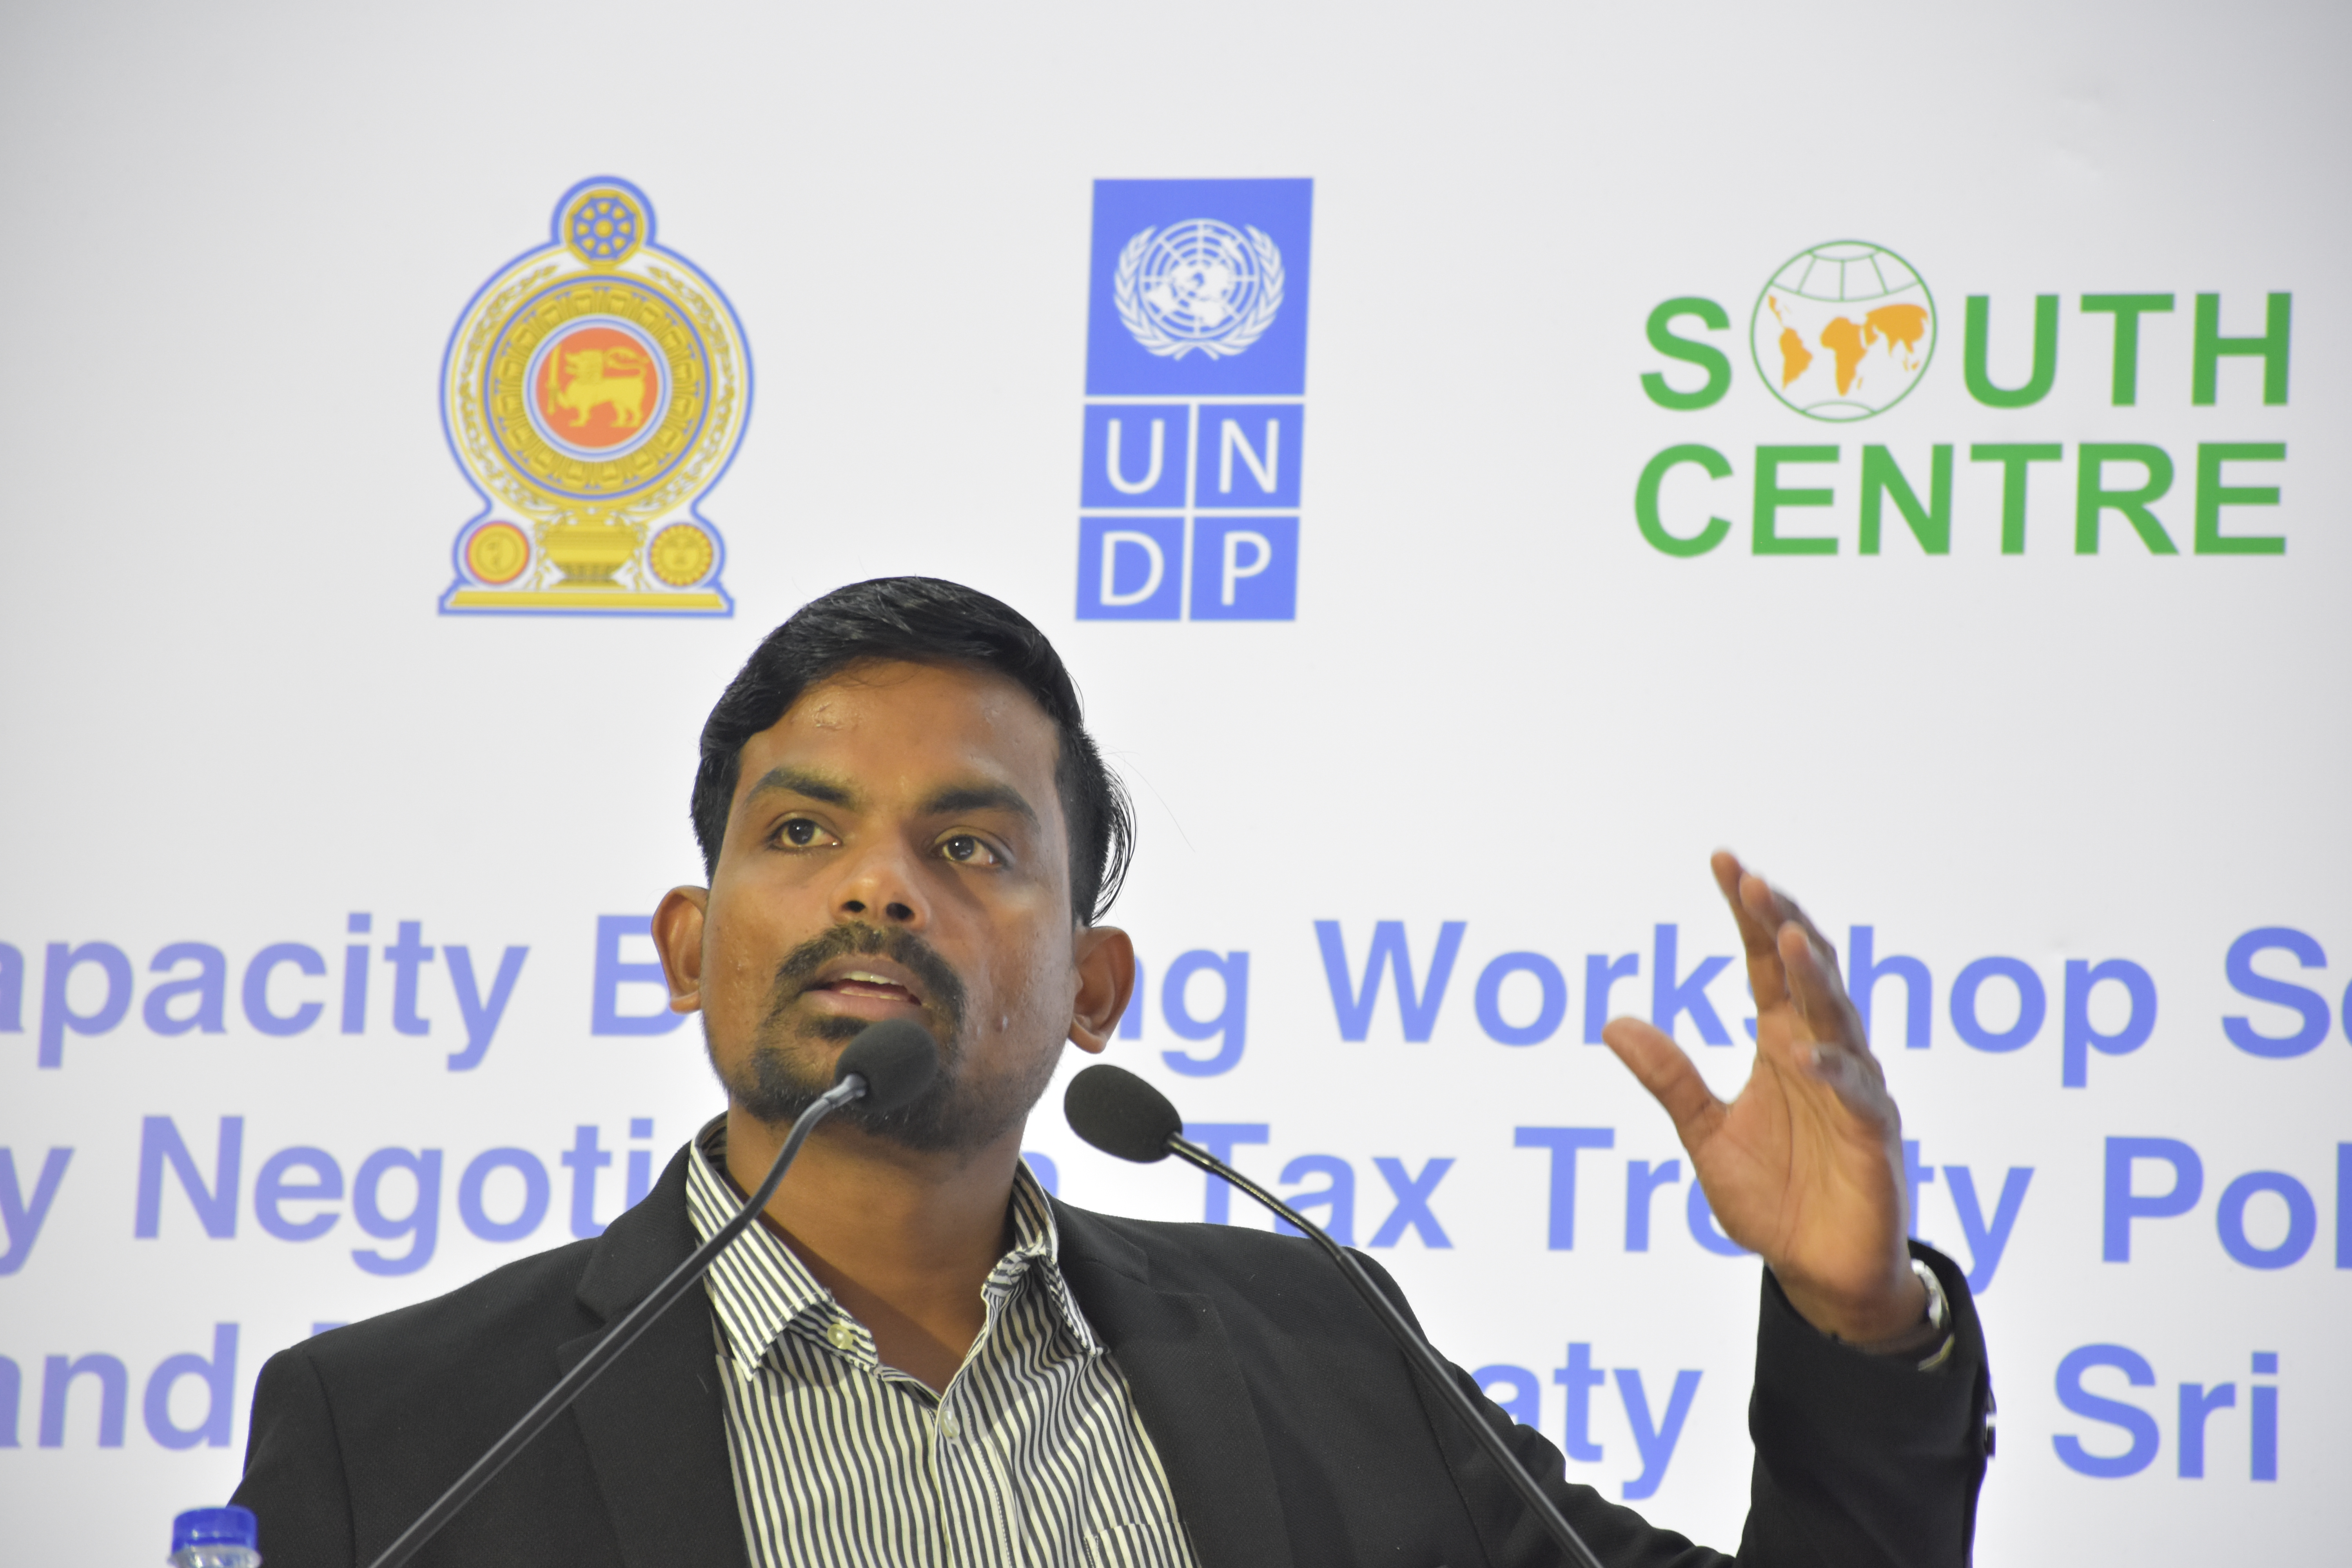 Enhancing International Tax Understanding: Insights and Impacts from a Recent Tax Treaty Workshop organised jointly by the UNDP and the South Centre